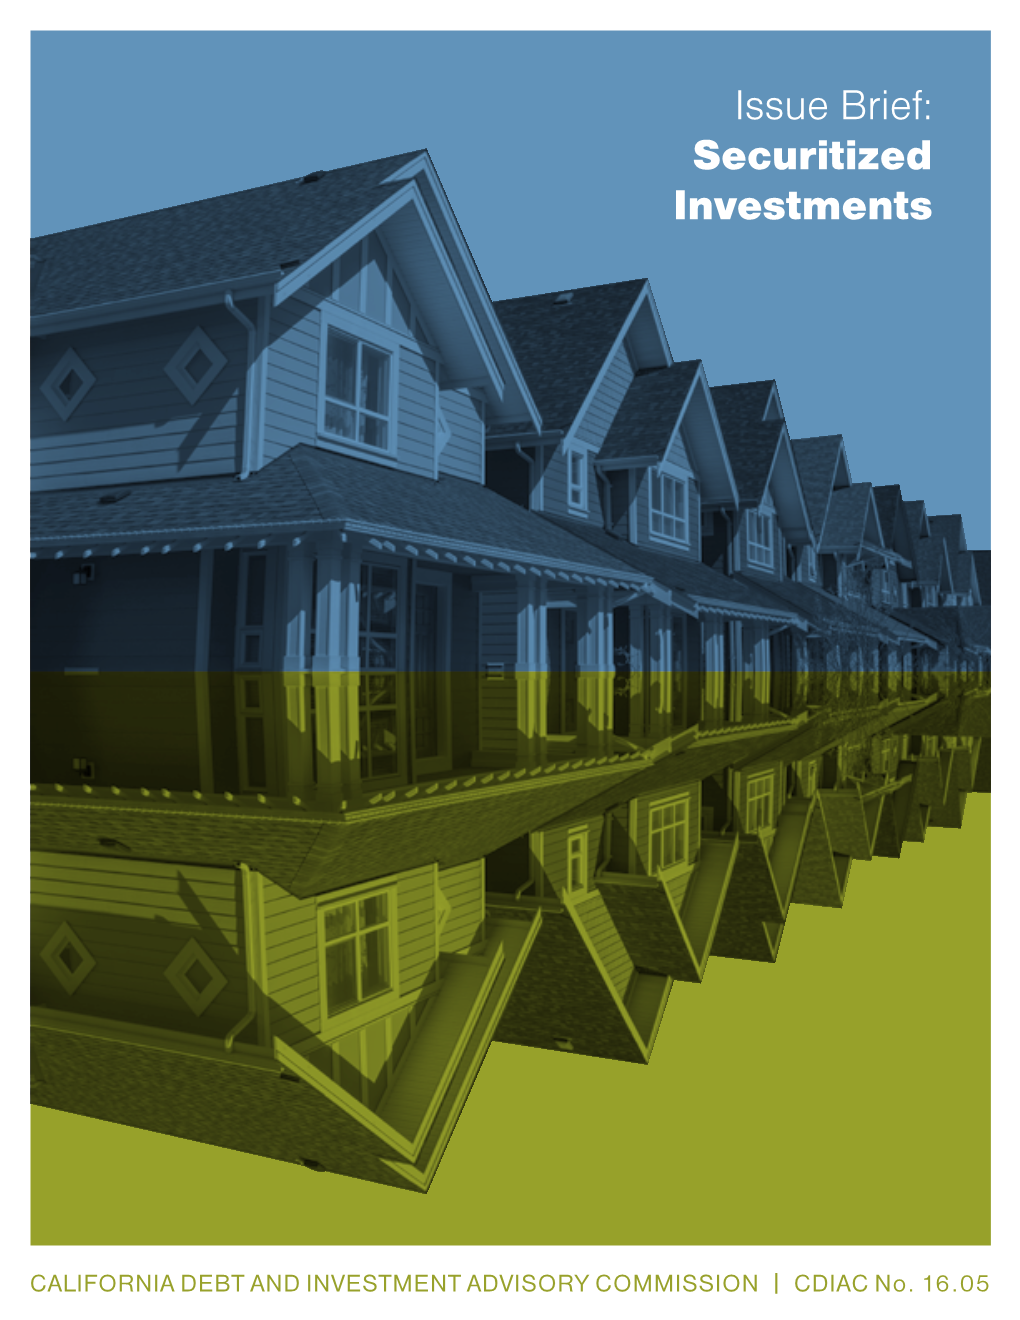 Issue Brief: Securitized Investments